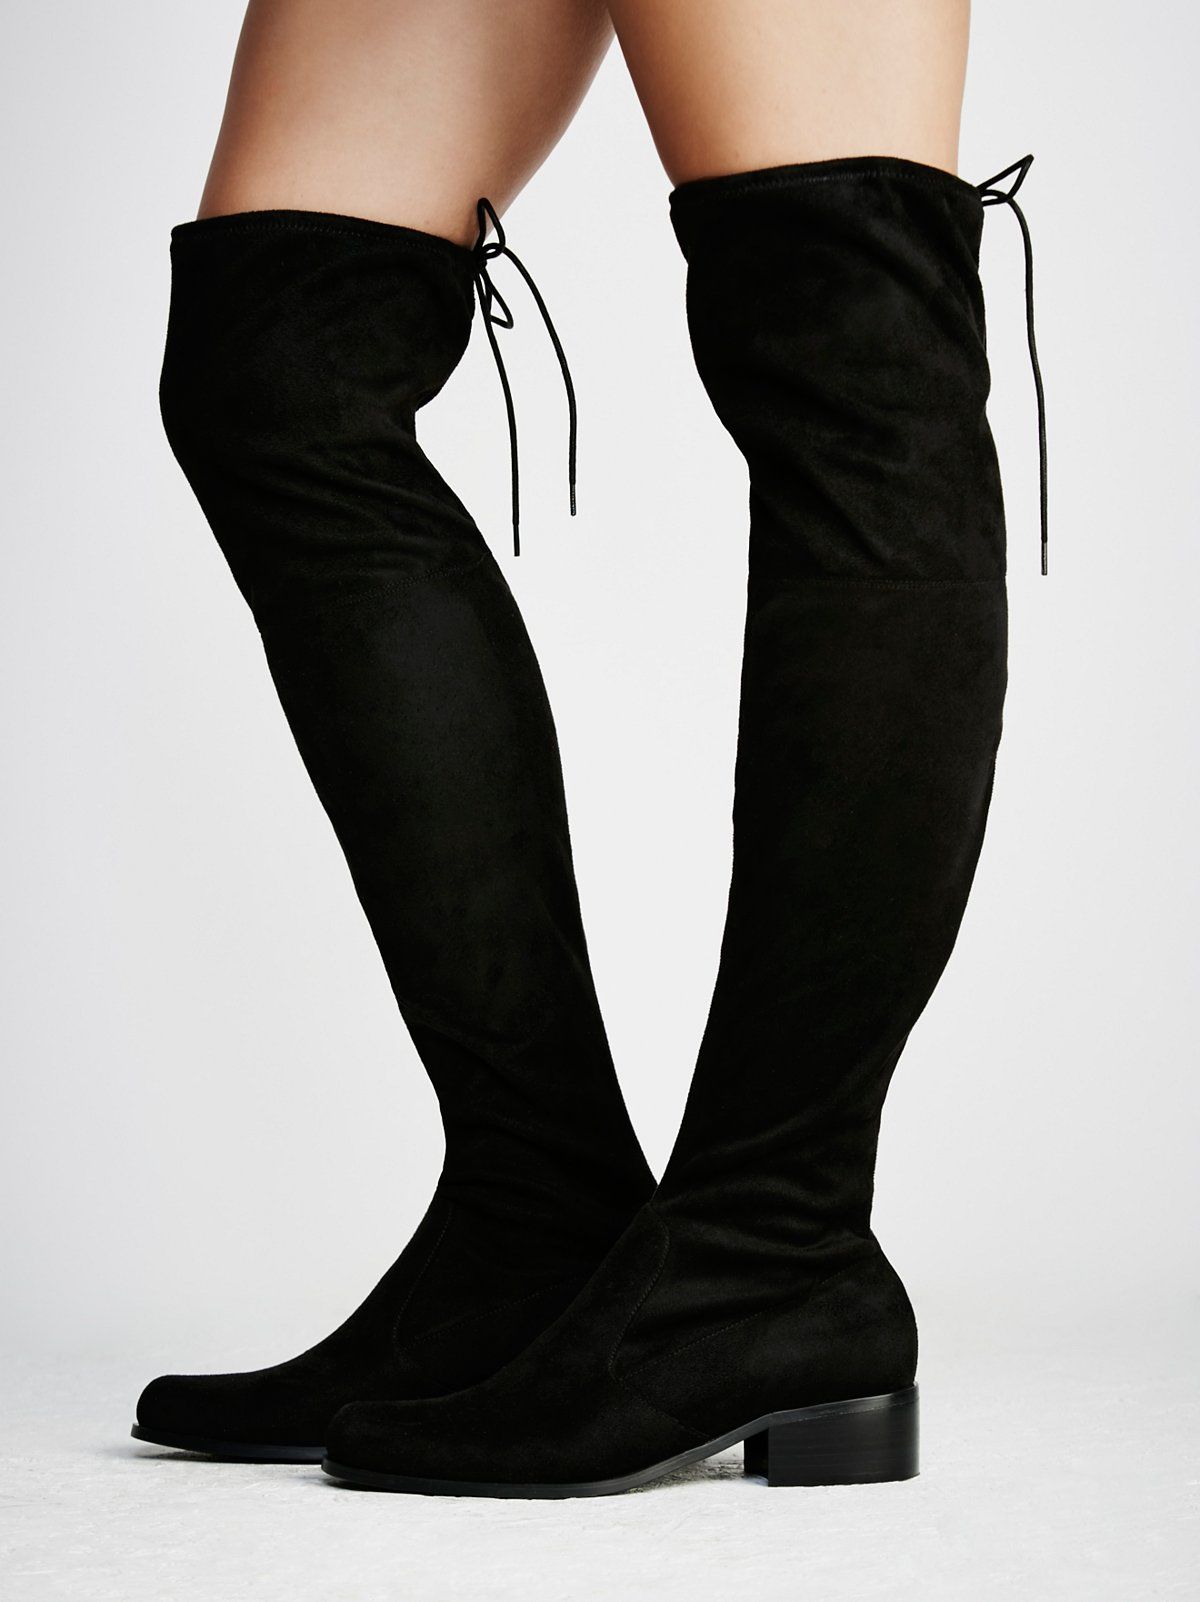 Dreamer Over the Knee Boot | Free People